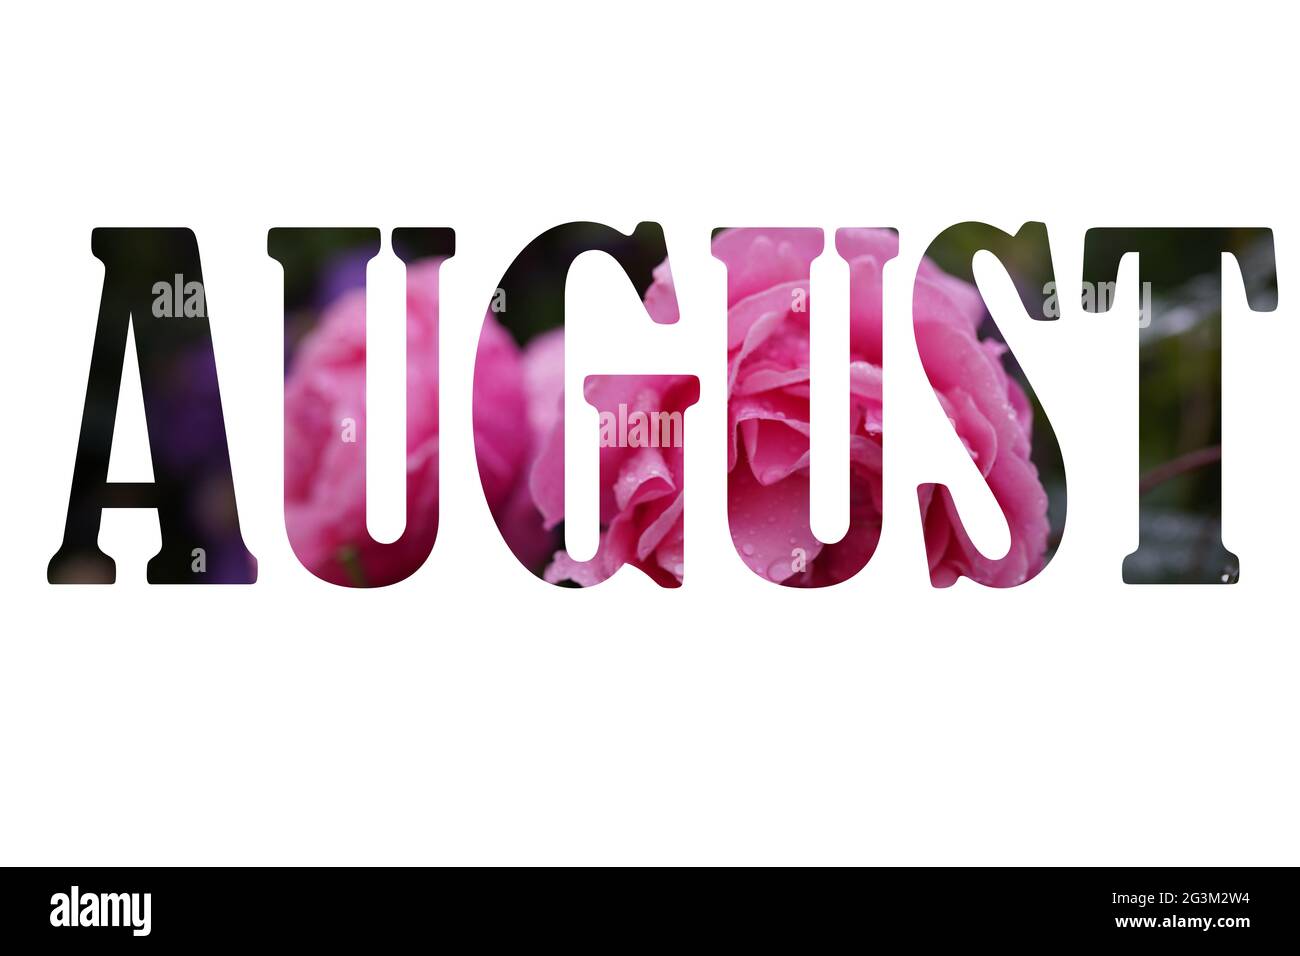 Word August made of leaves and flowers on white background. Creative photo Stock Photo